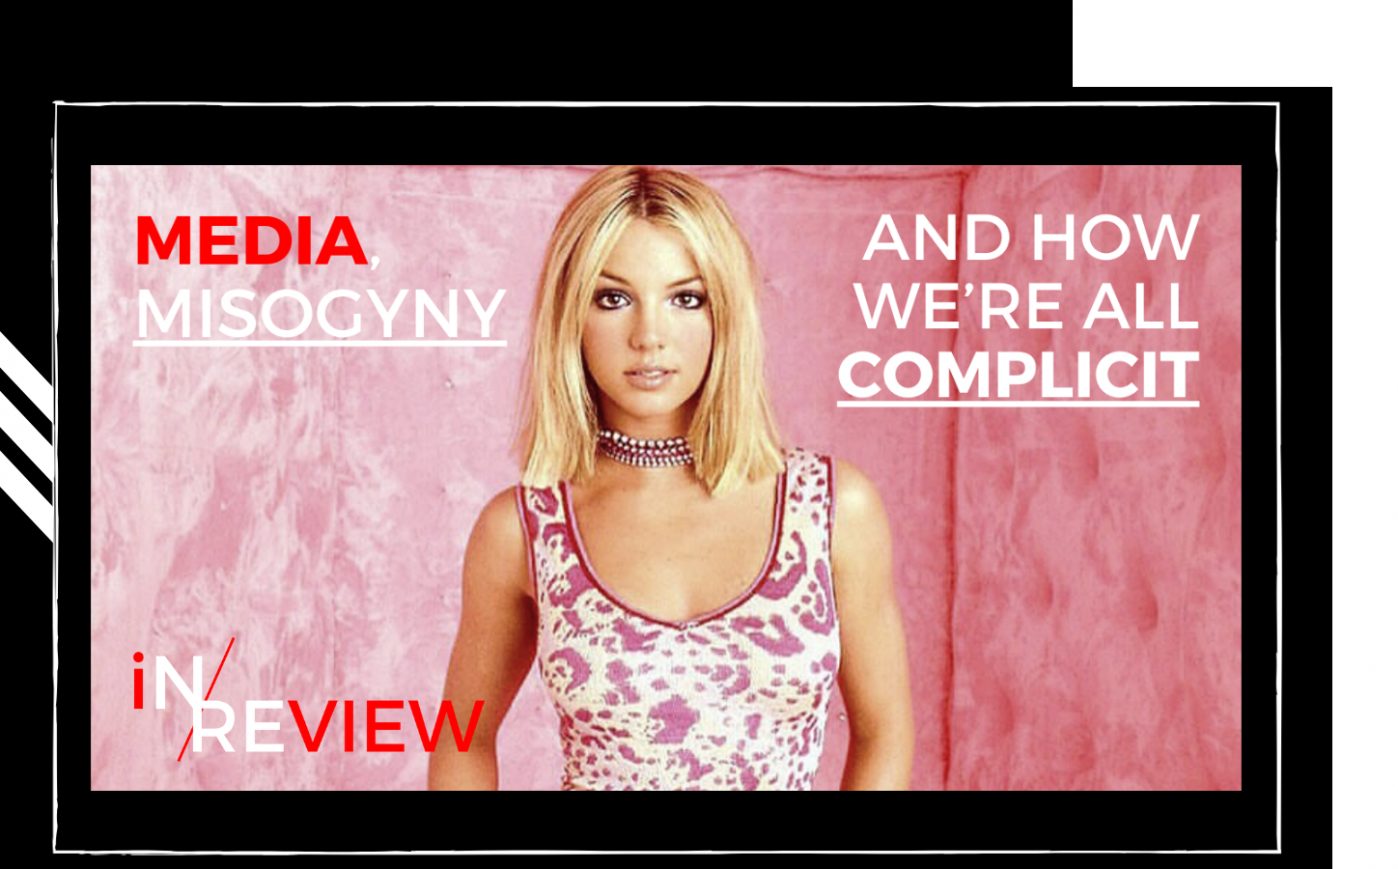 Britney: Media, Misogyny and how we’re all complicit